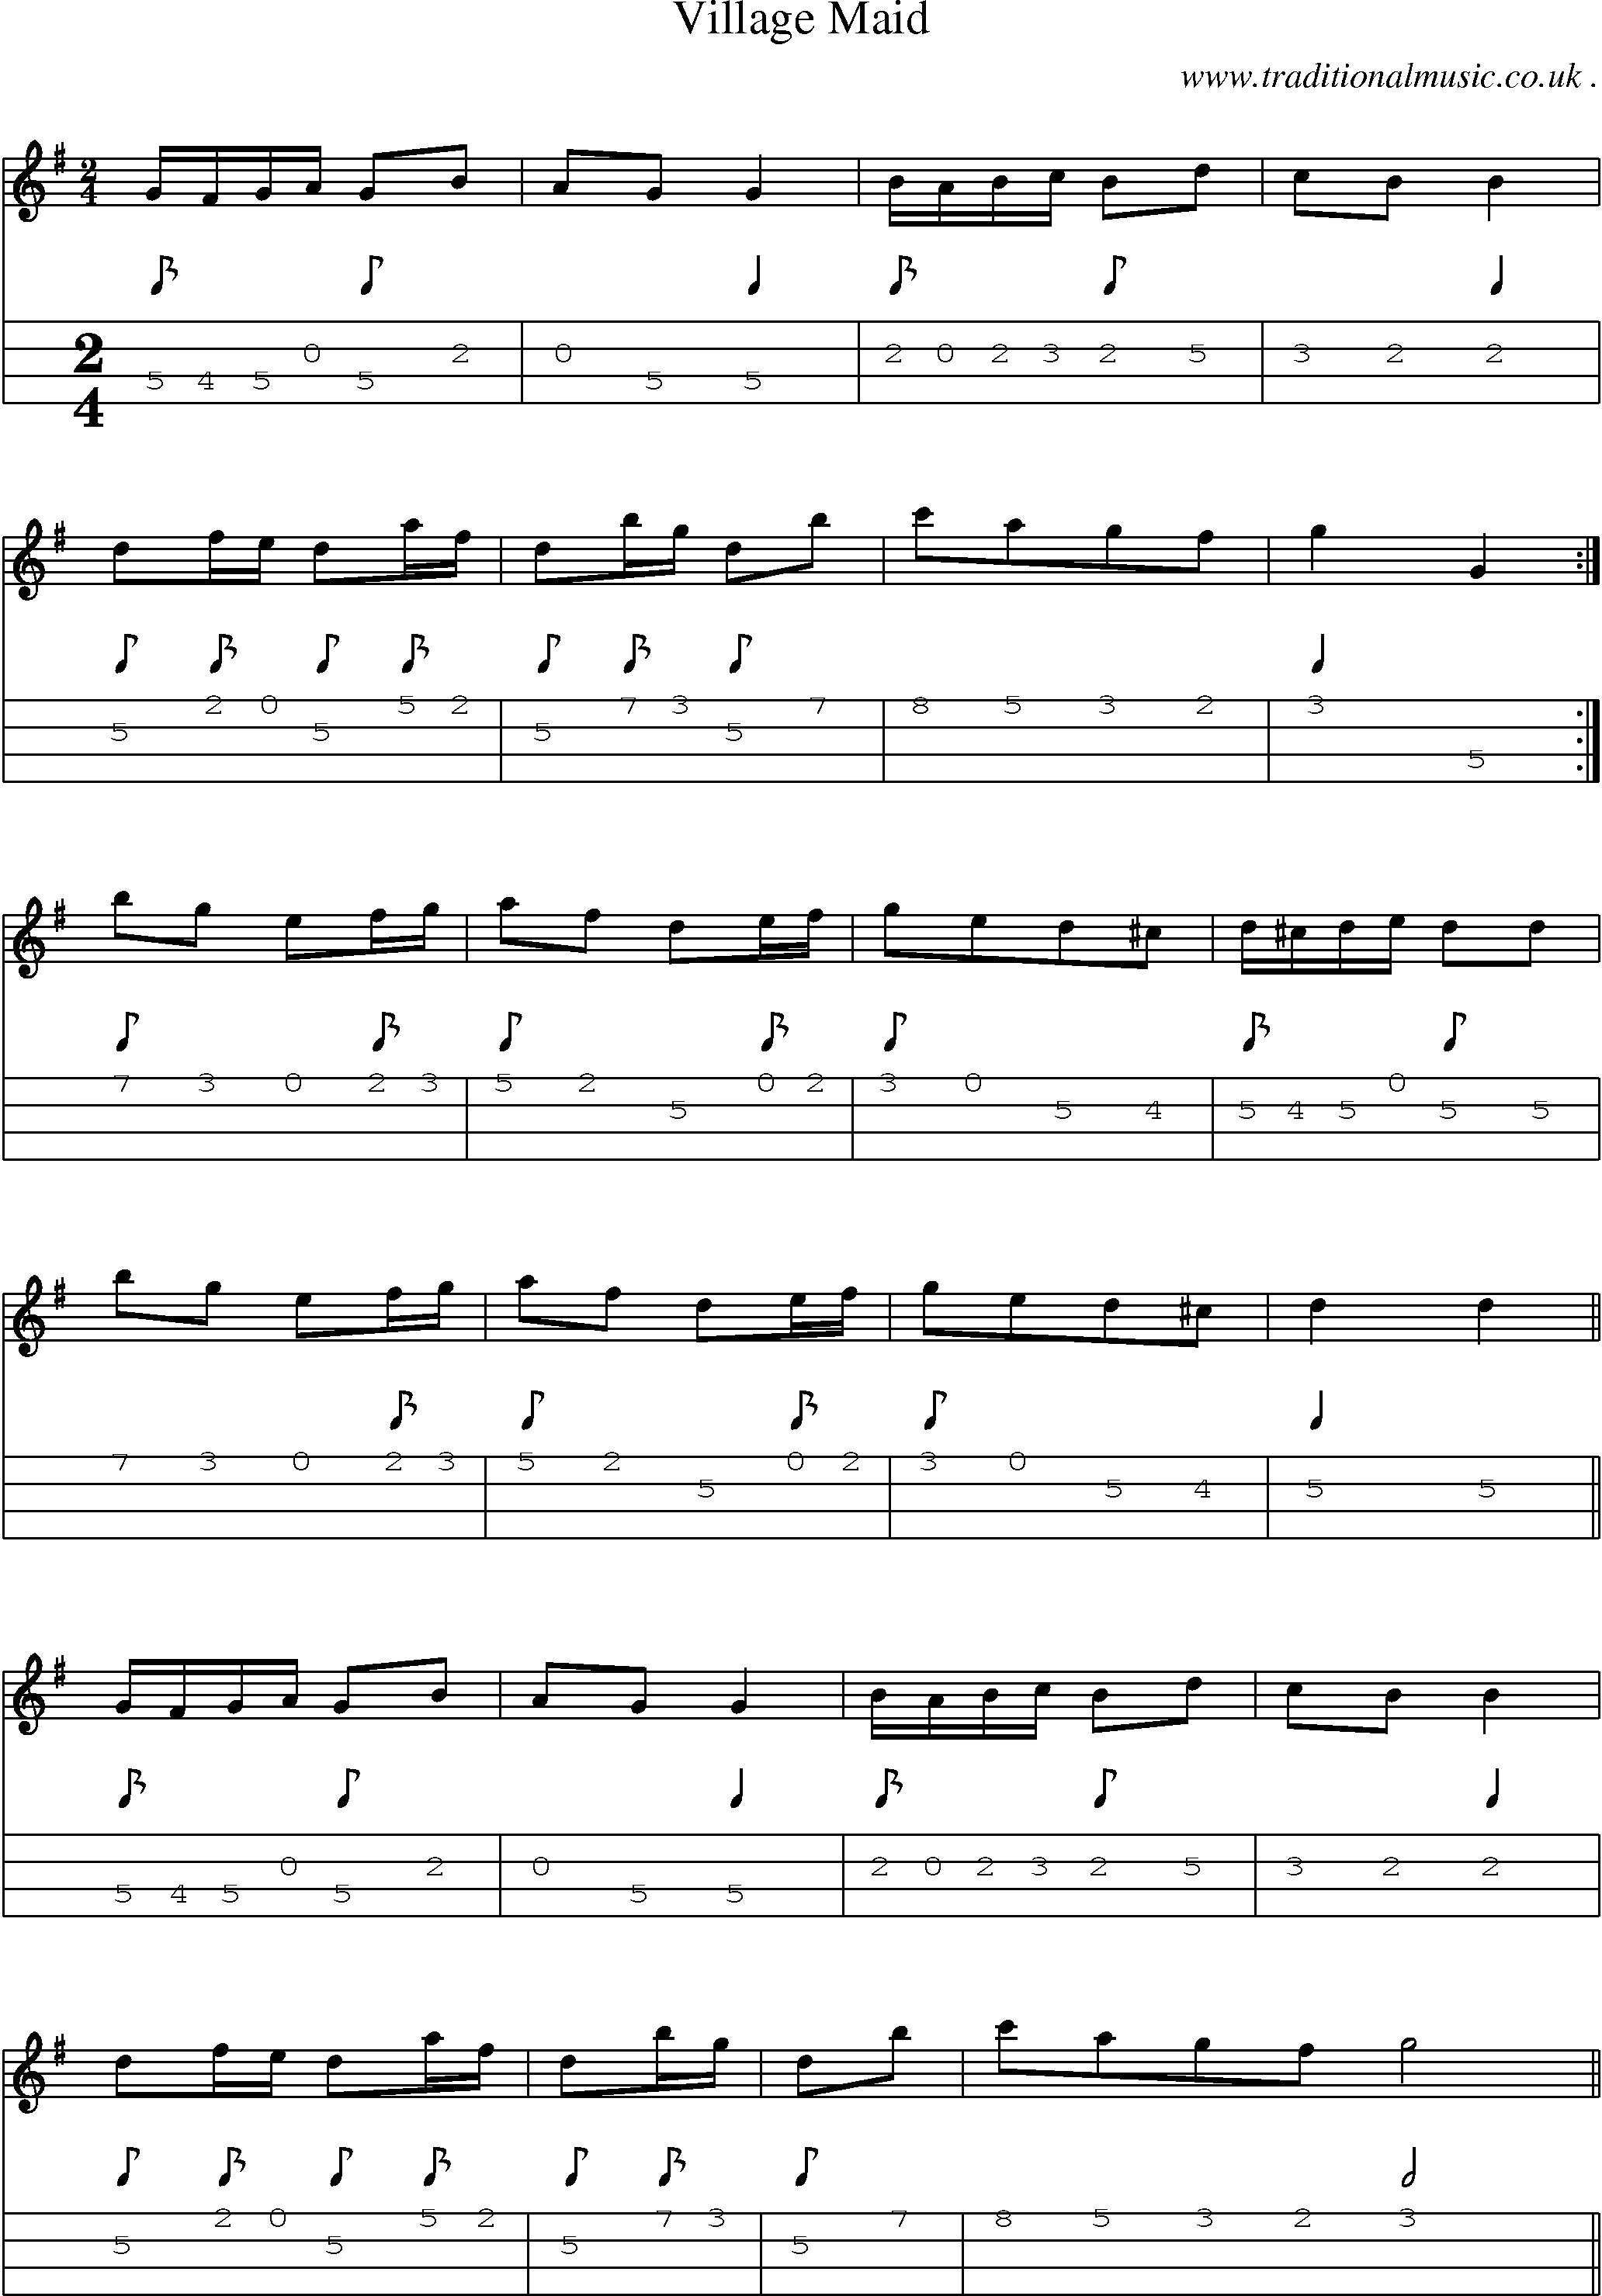 Sheet-Music and Mandolin Tabs for Village Maid